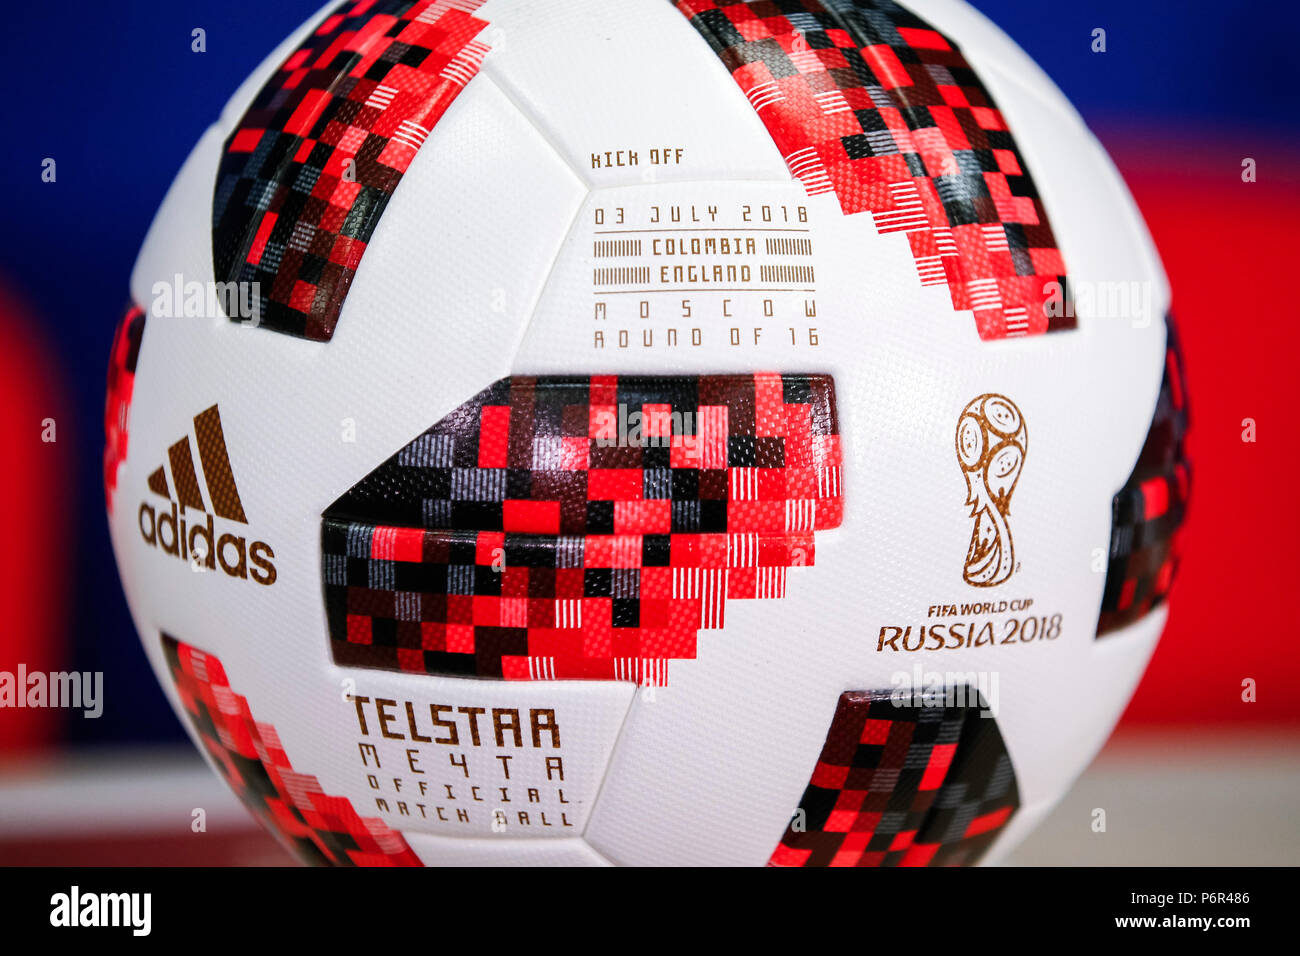 Moscow, Russia. 2nd July 2018. The Adidas Telstar Mechta Match Ball is seen  before an England press conference, prior to their 2018 FIFA World Cup  Round of 16 match against Colombia, at